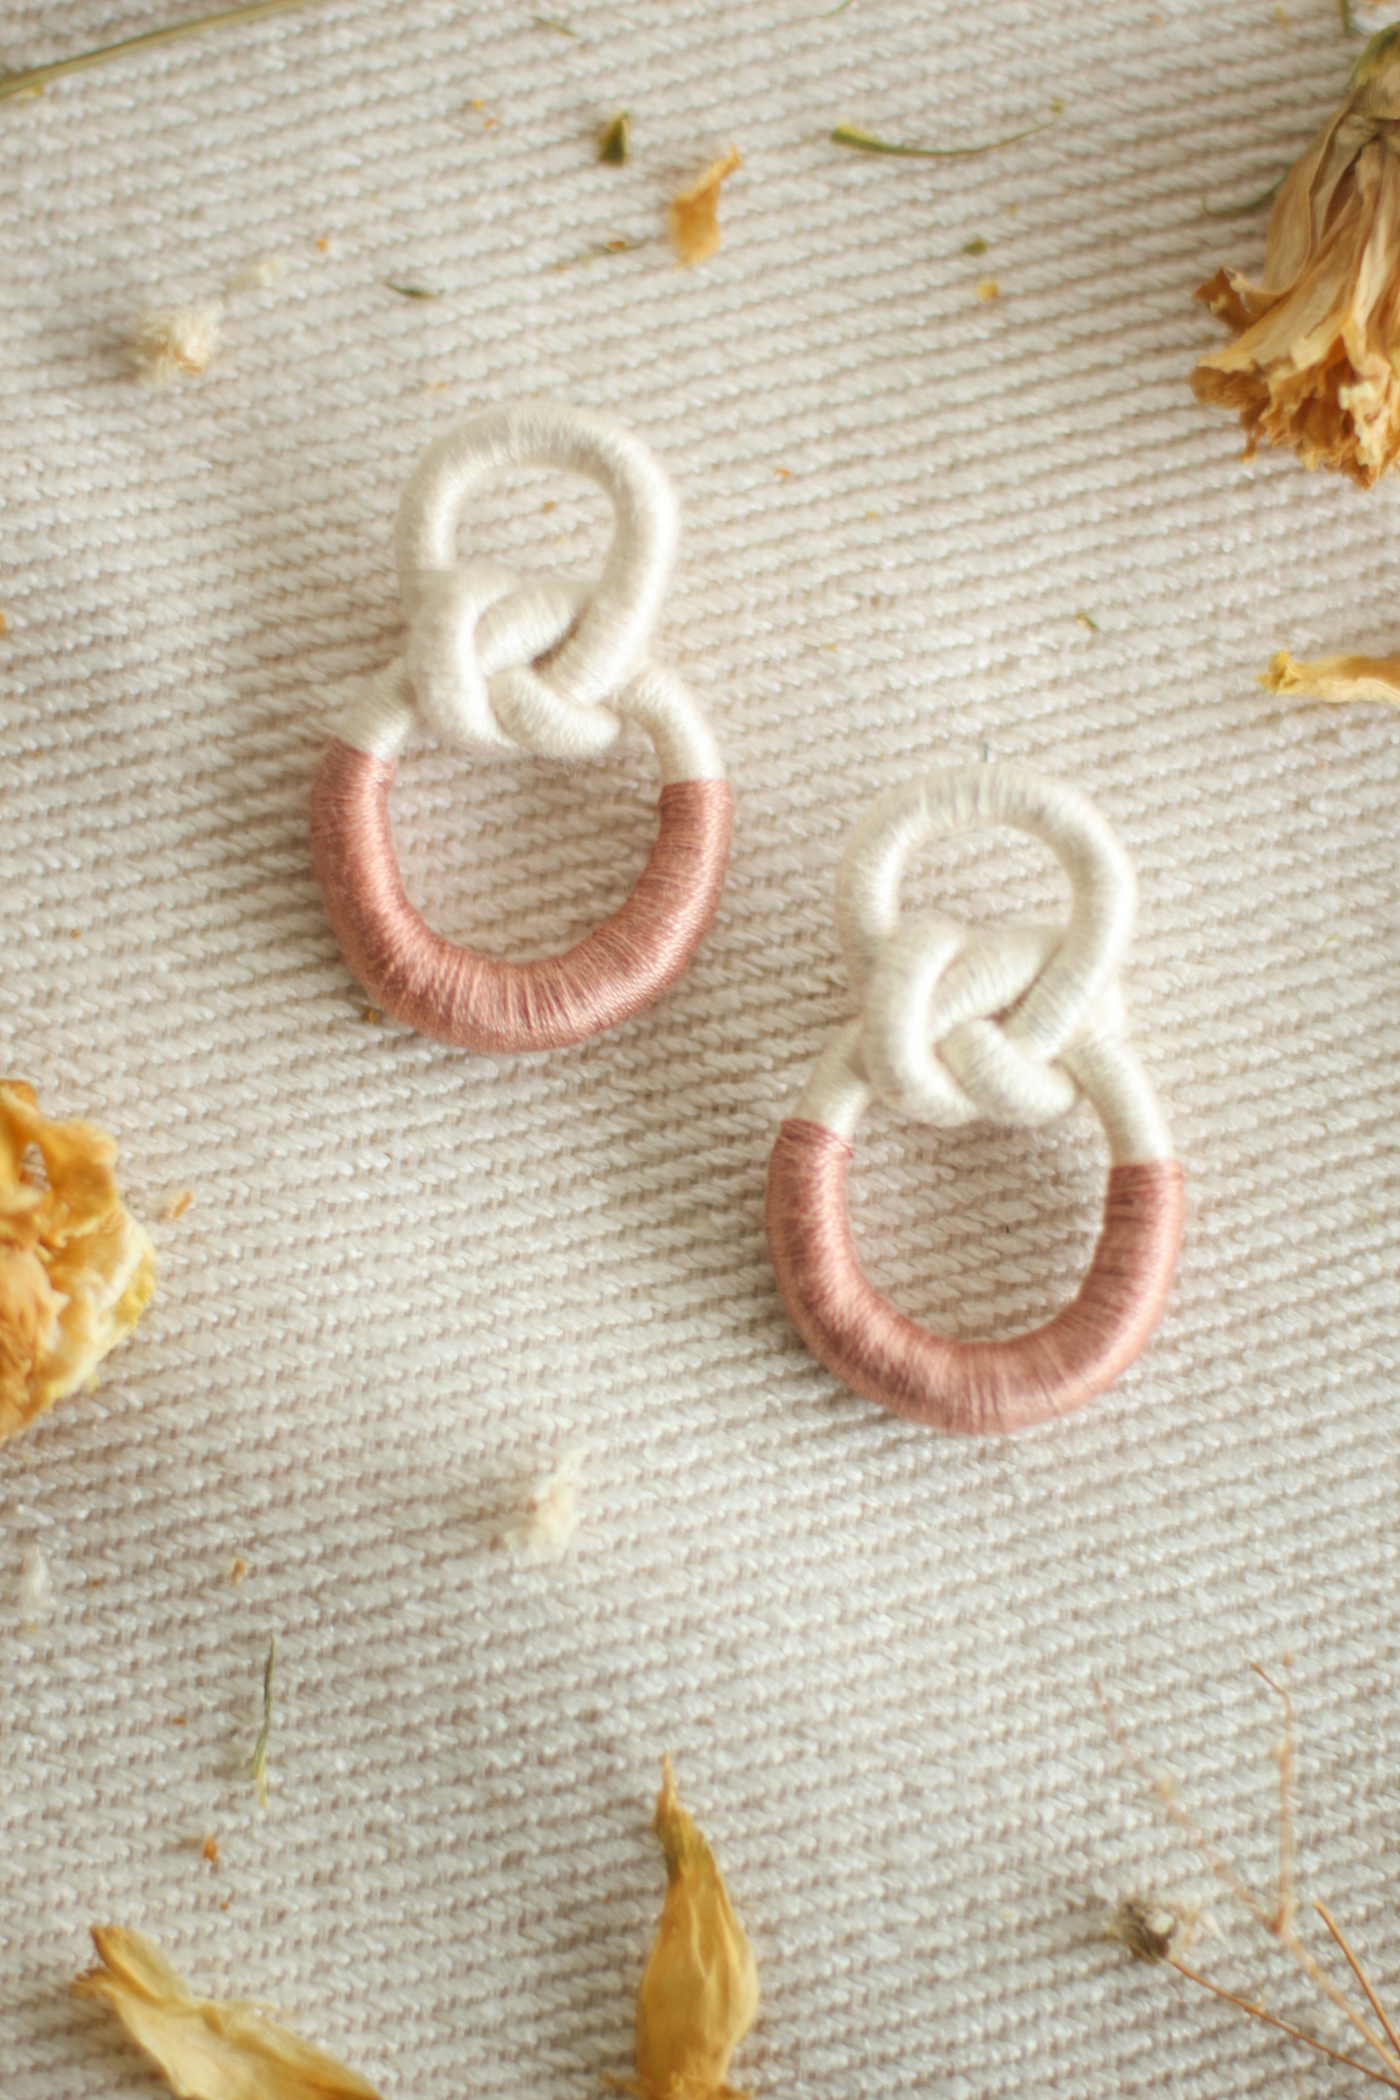 Talee Zia Loop Earrings in Pearl & Petal, available on ZERRIN with free Singapore shipping